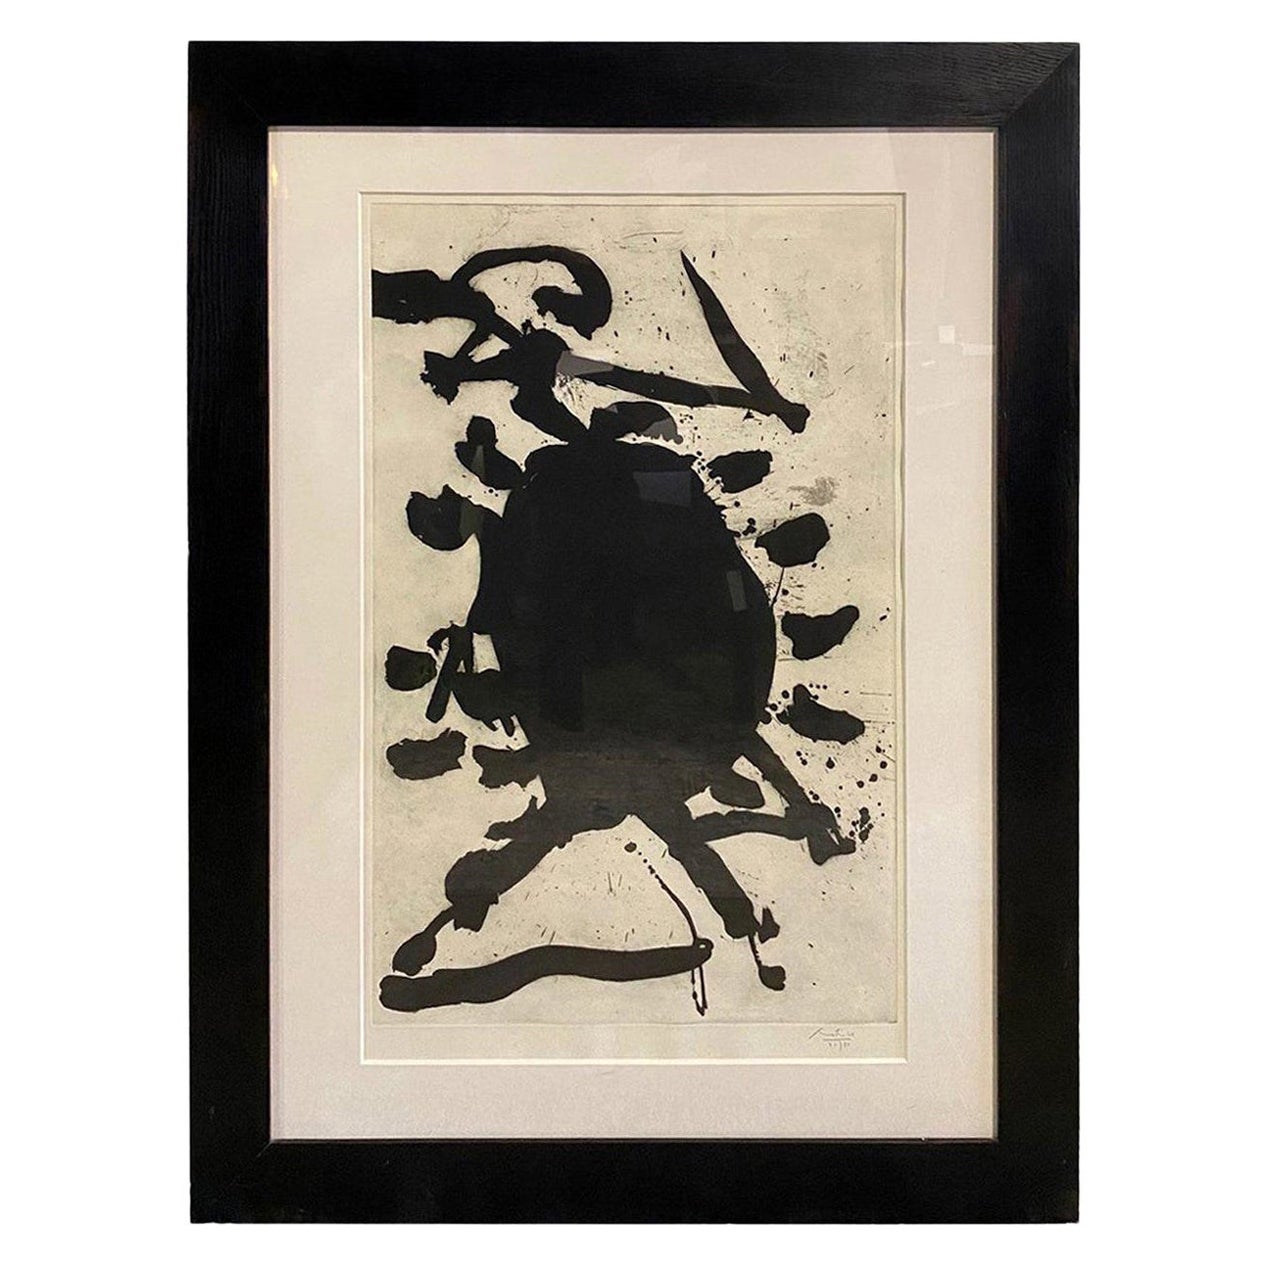 Robert Motherwell Signed Limited Edition Large Aquatint Etching Blackened Sun